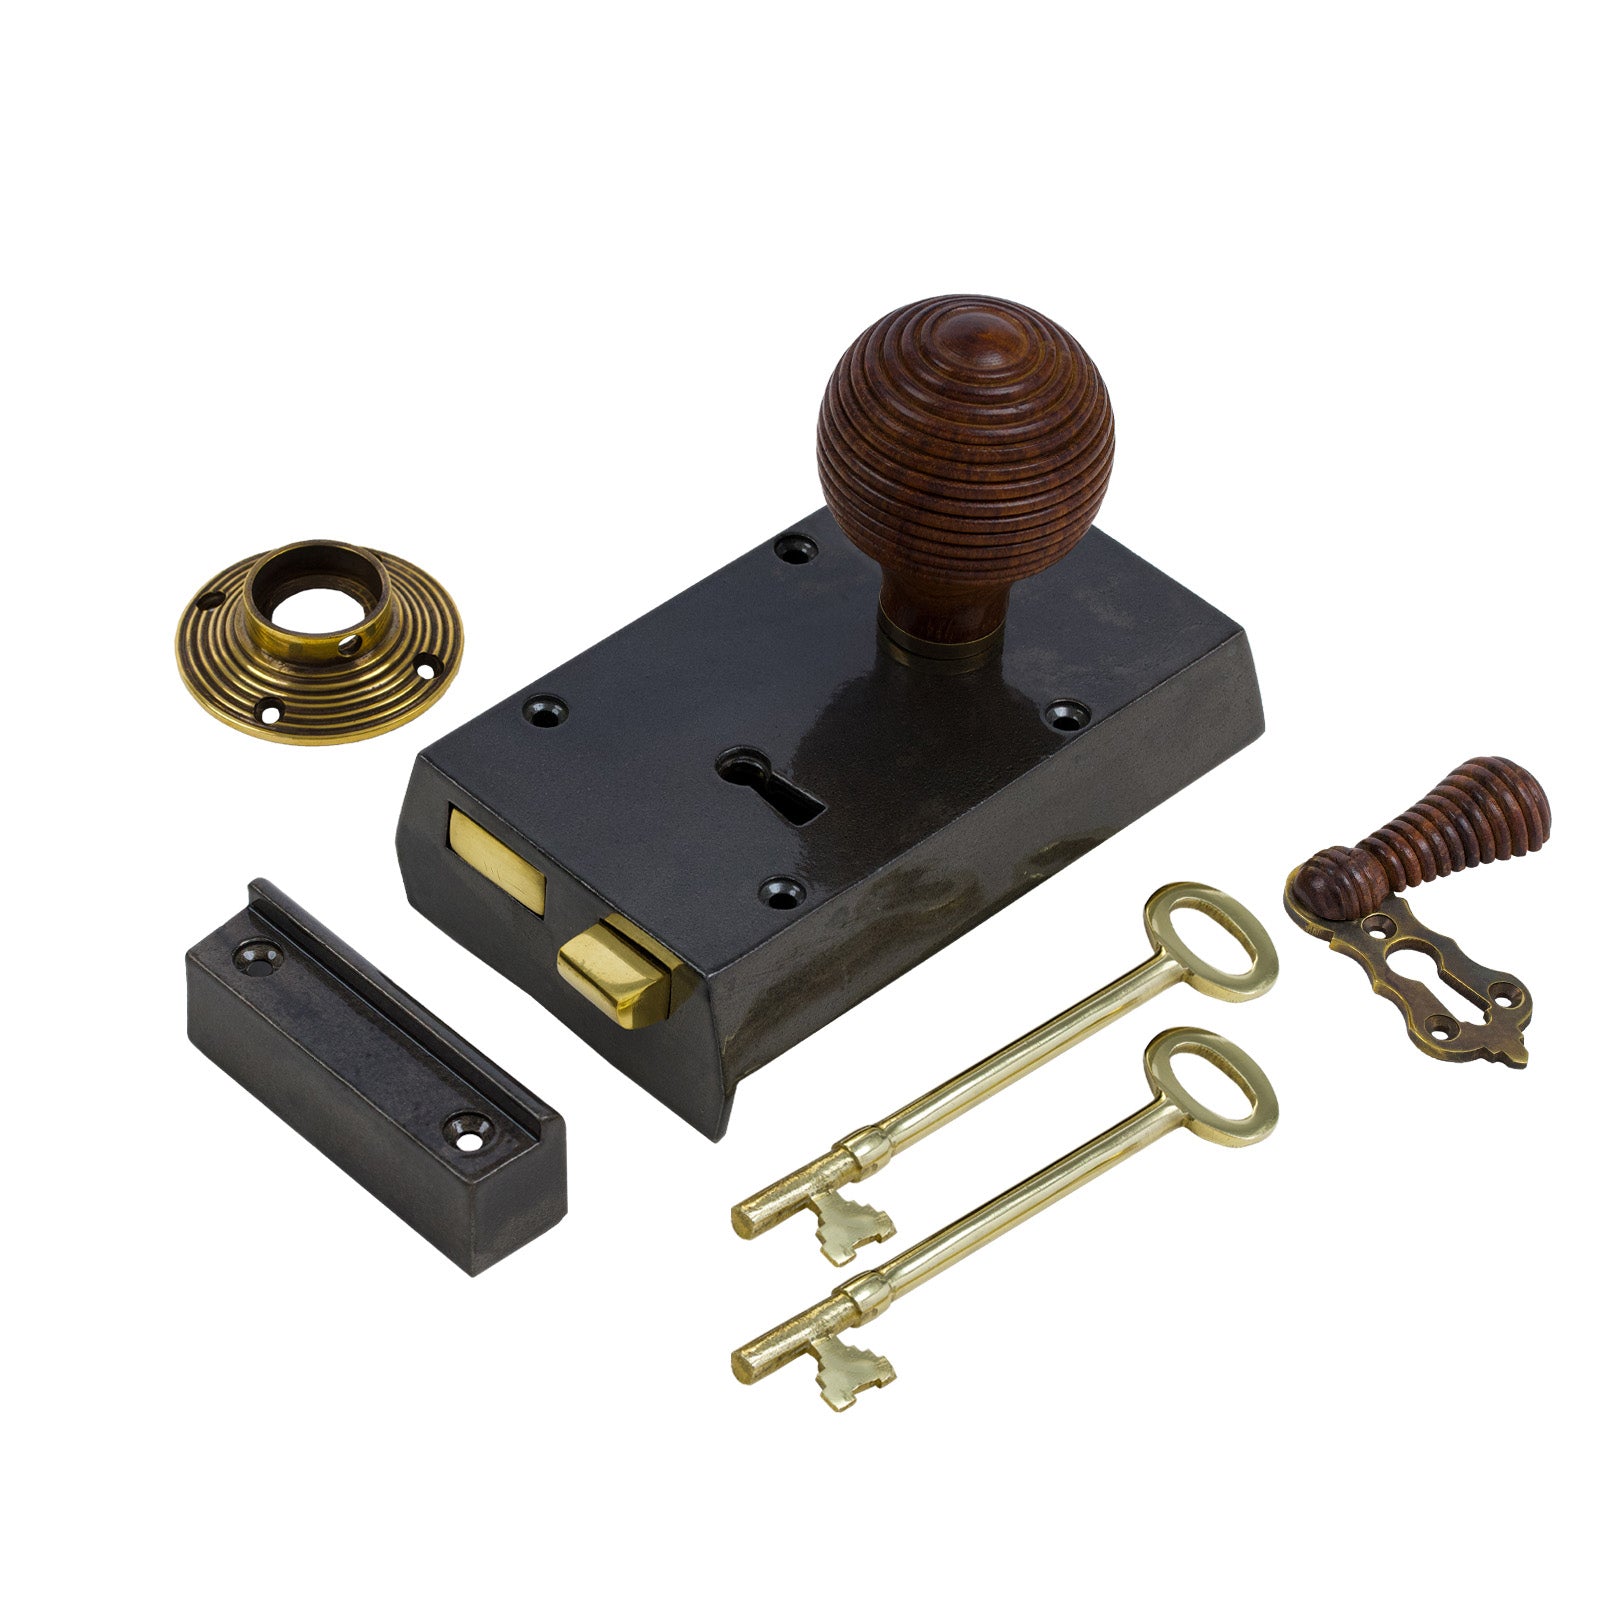 SHOW Right Handed Small Cast Iron Rim Lock With Beehive Door Knob Set - Rosewood